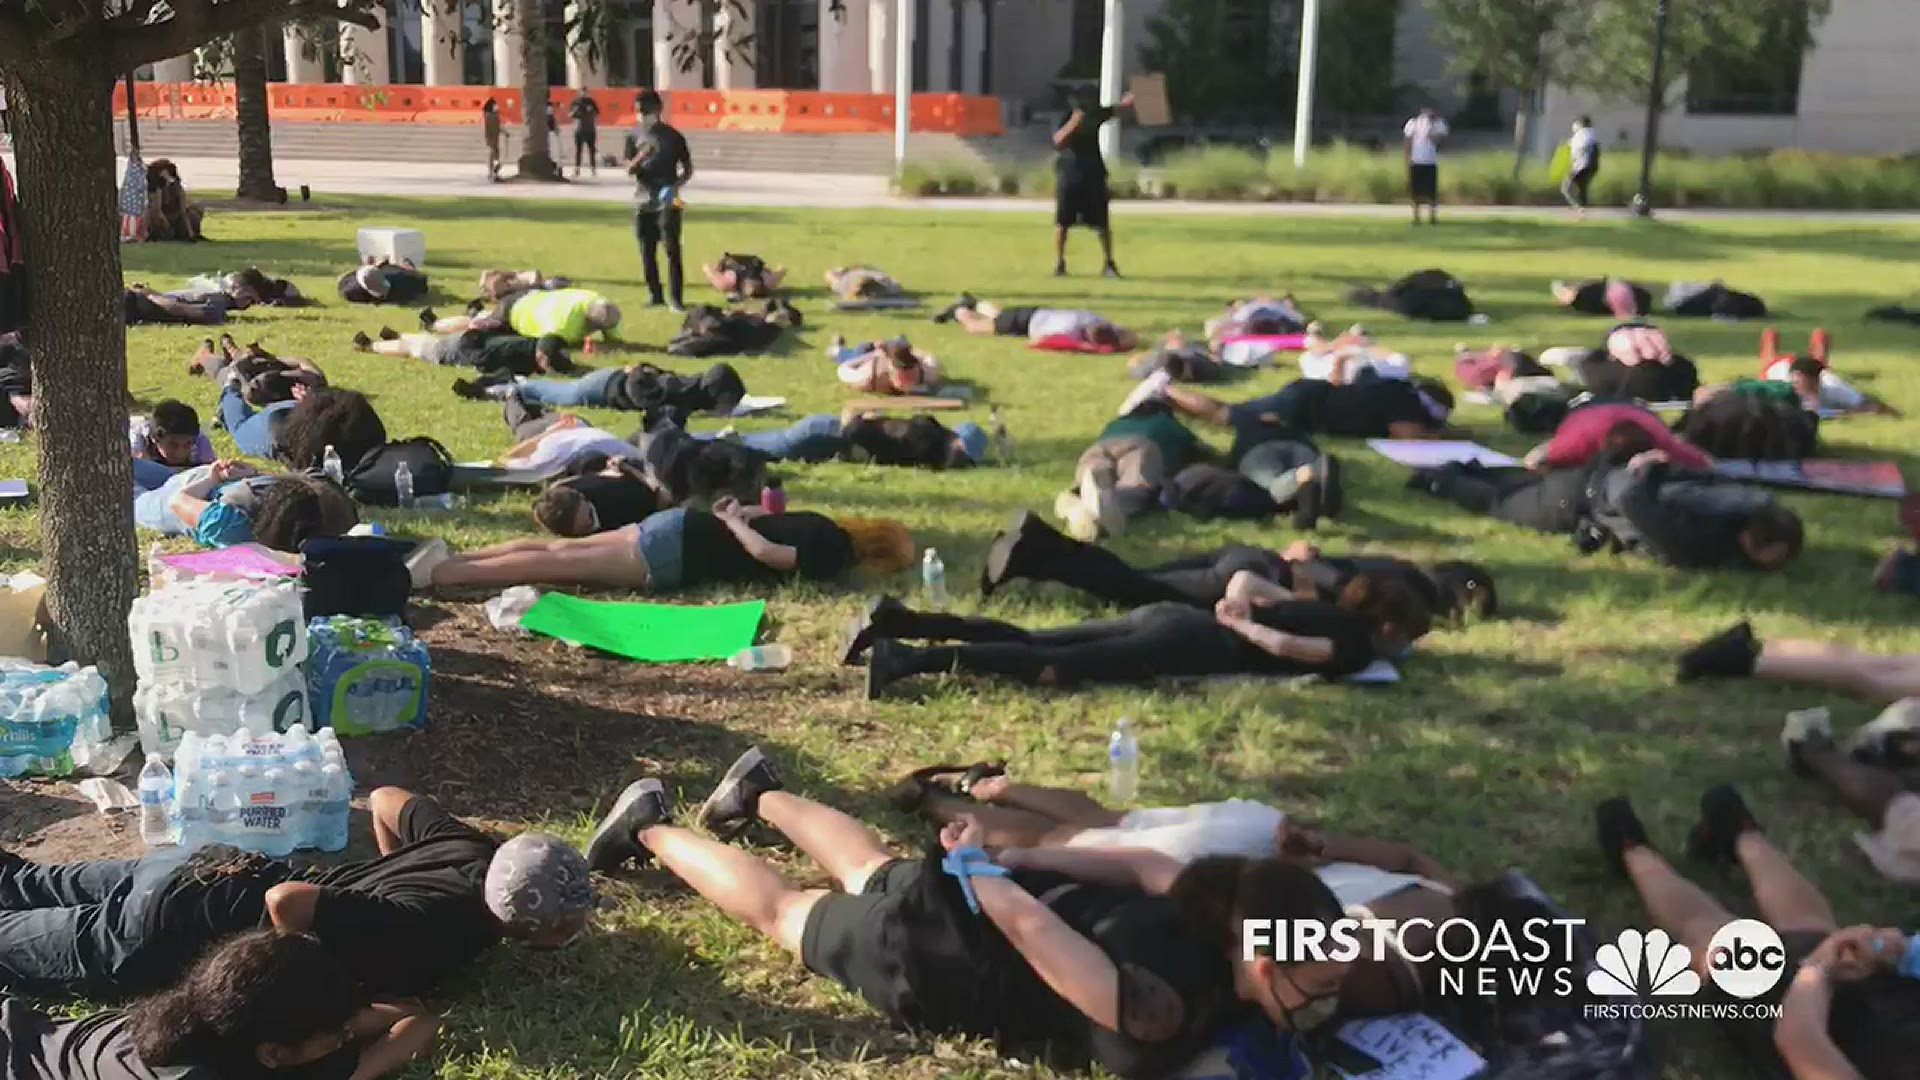 The protesters chanted "I can't breathe!" as they lay on the lawn of the Duval County Courthouse.